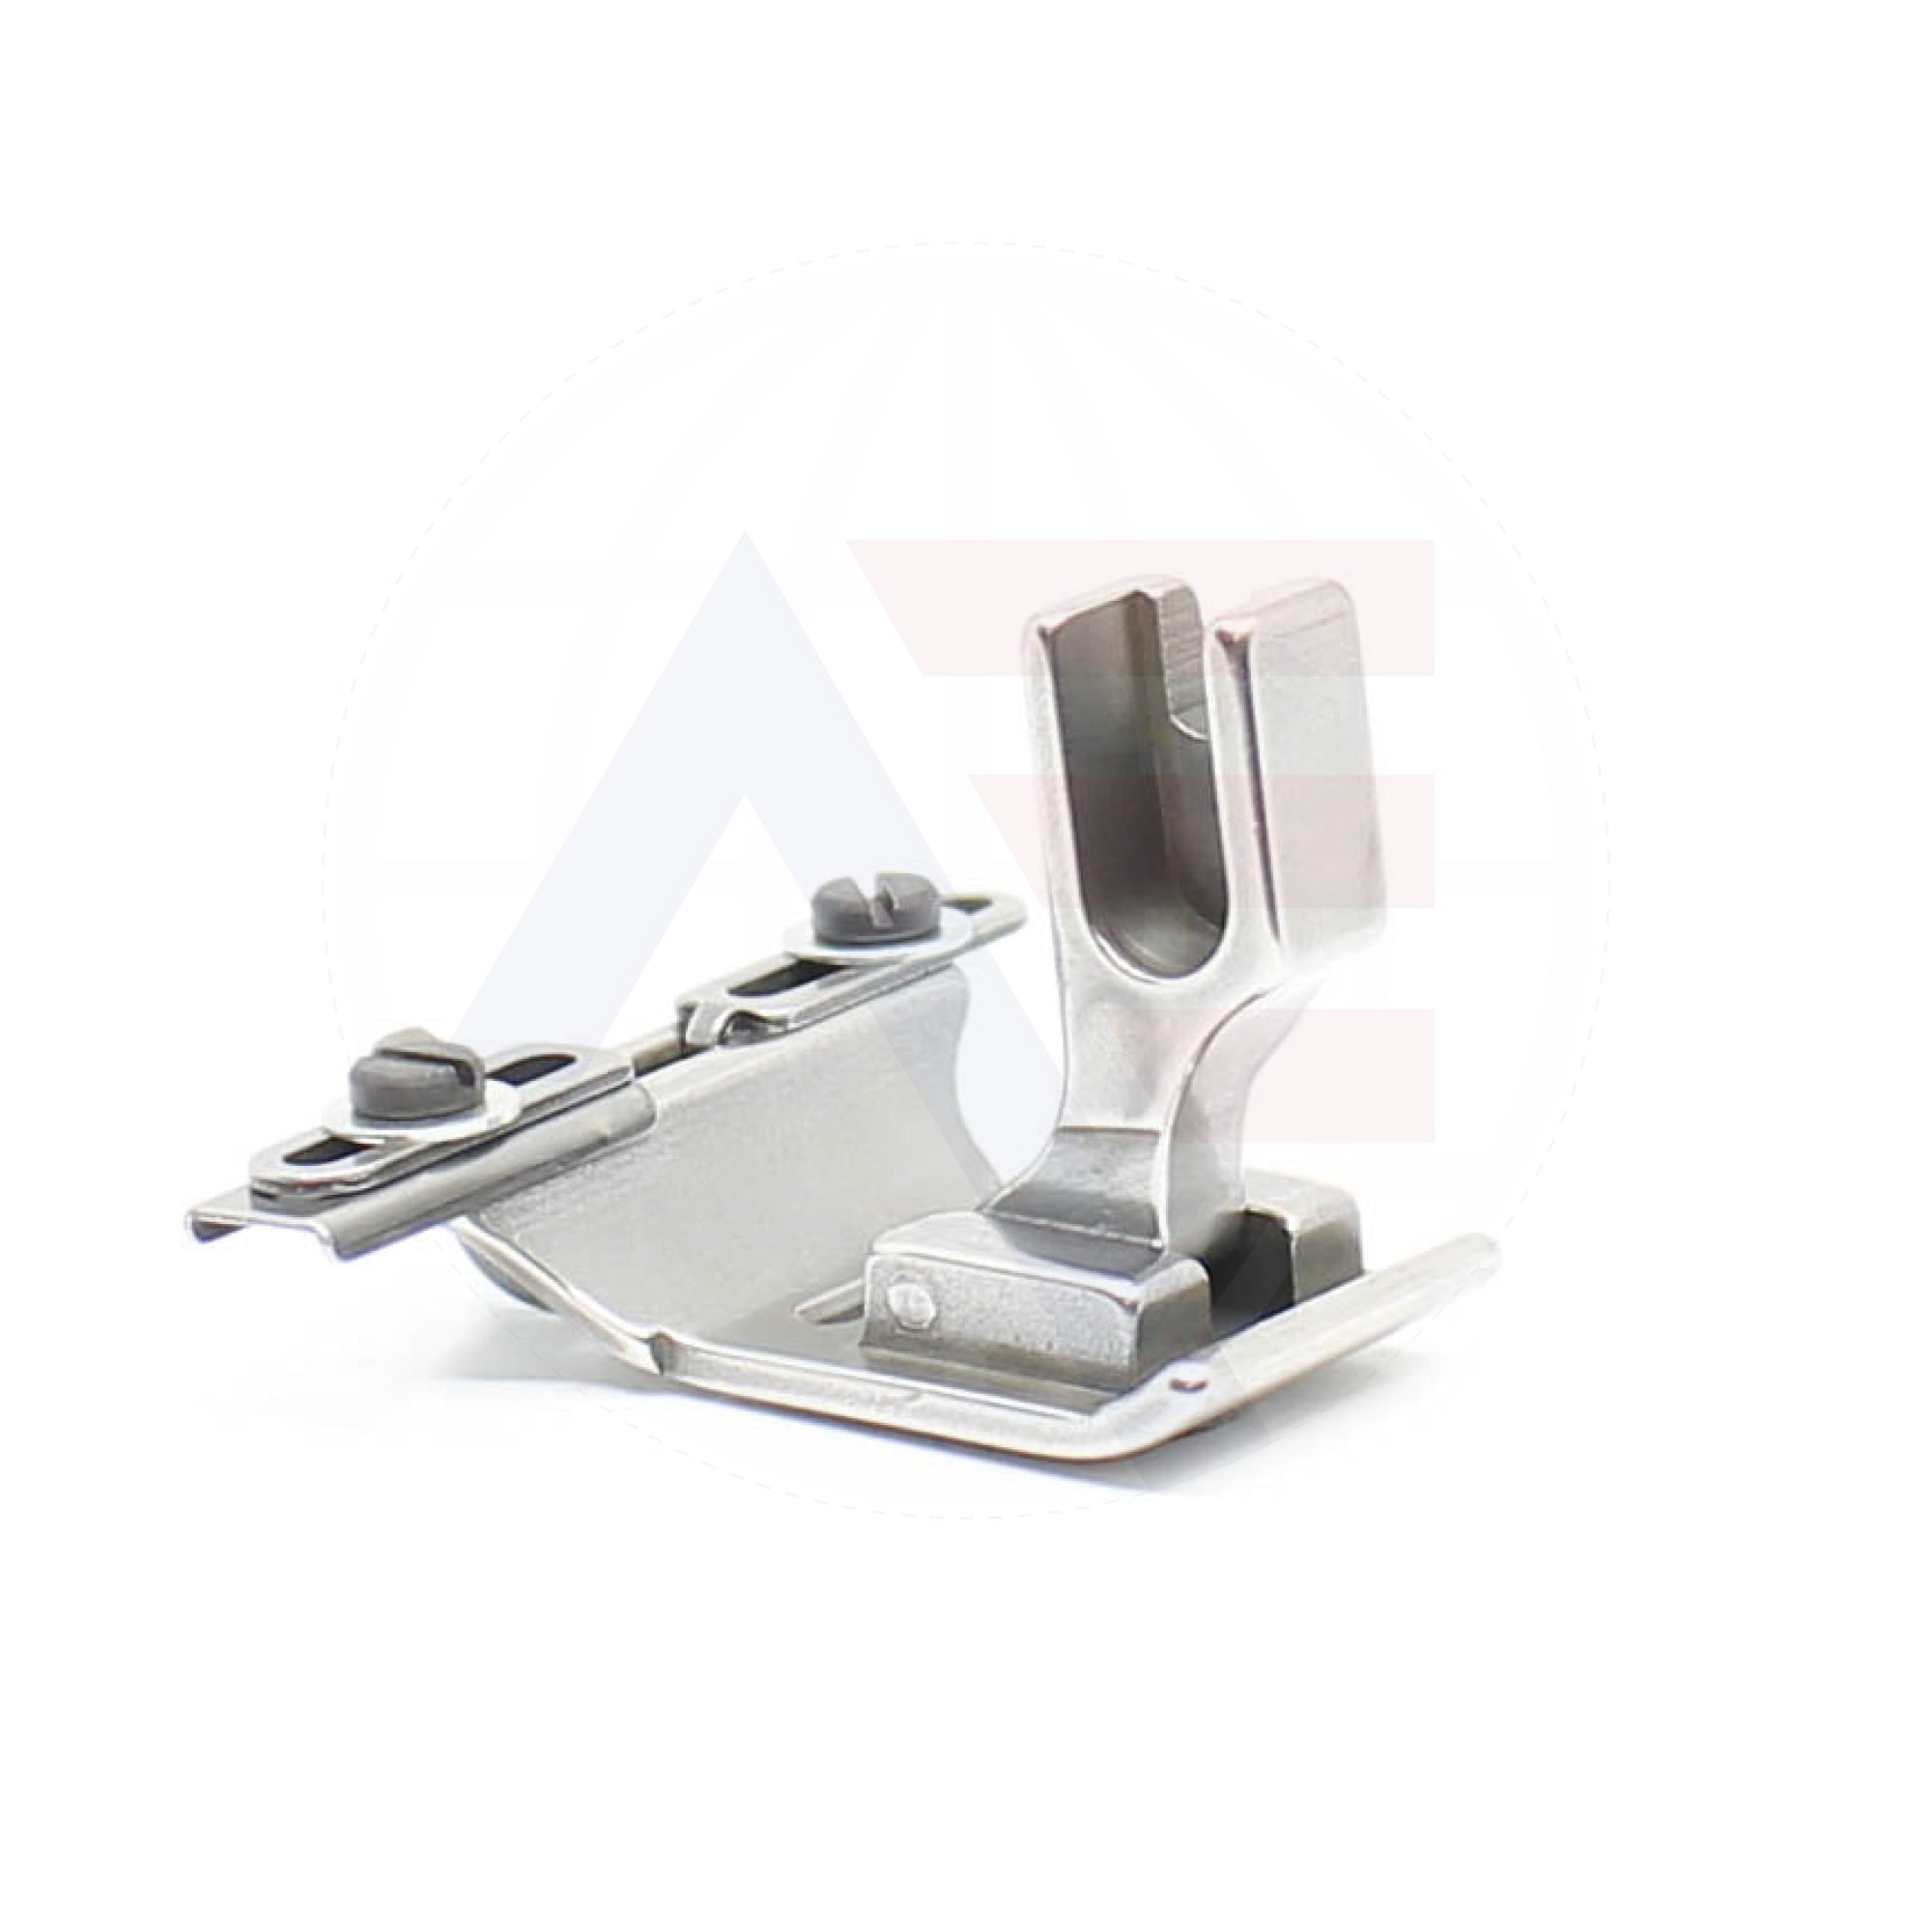 G10652Crl Cloth Guide Foot Sewing Machine Spare Parts